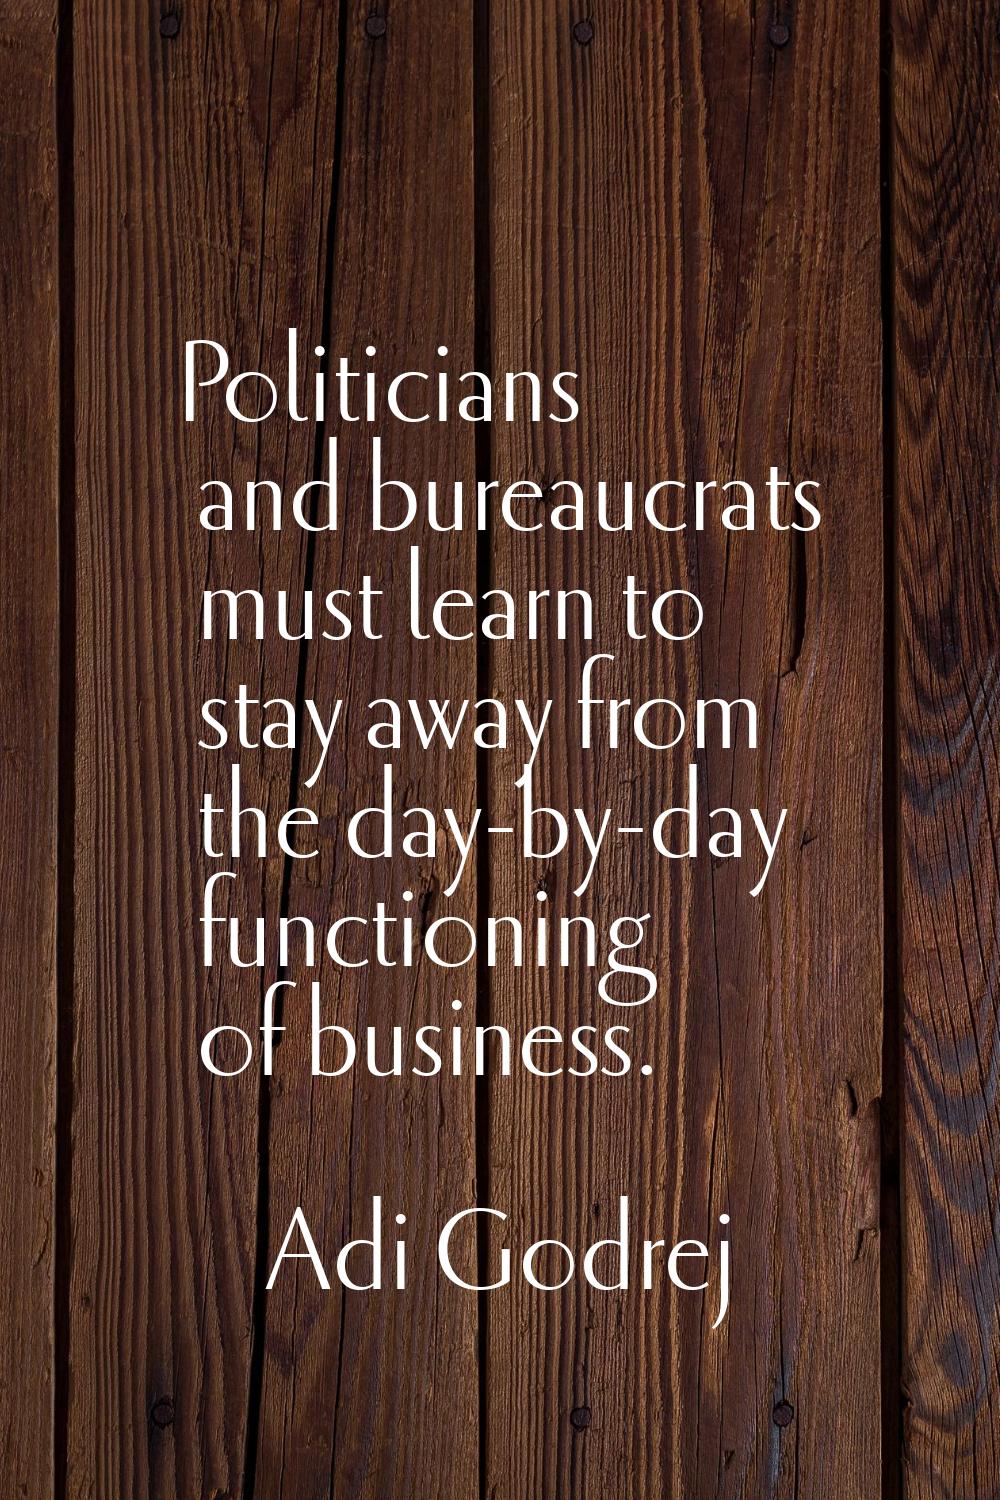 Politicians and bureaucrats must learn to stay away from the day-by-day functioning of business.